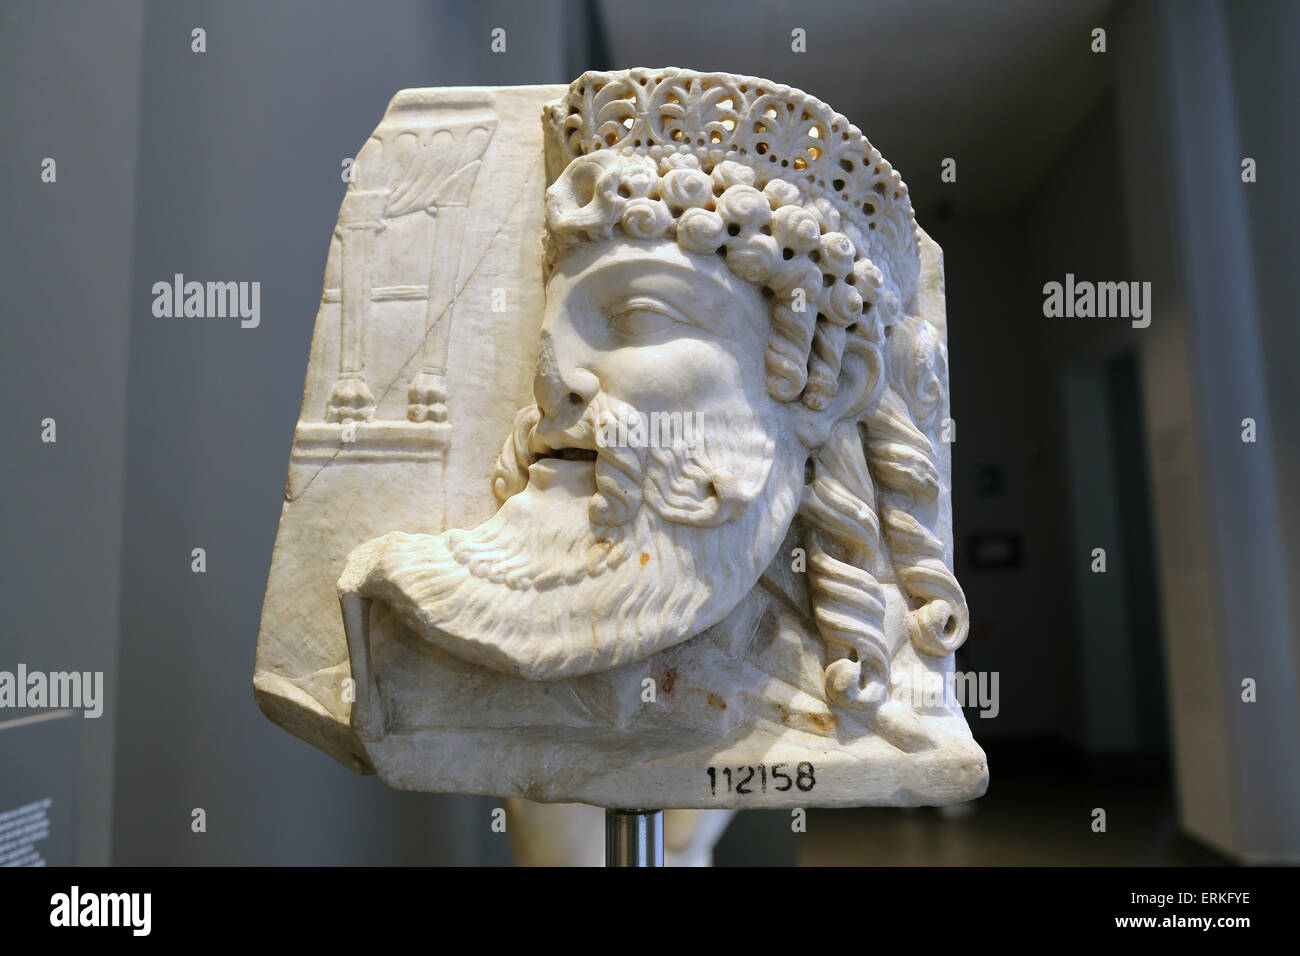 Roman relief. Mask of a deity wearing a crown in archaizing style and a tripod in the background. 1st c. AD. Rome. Stock Photo